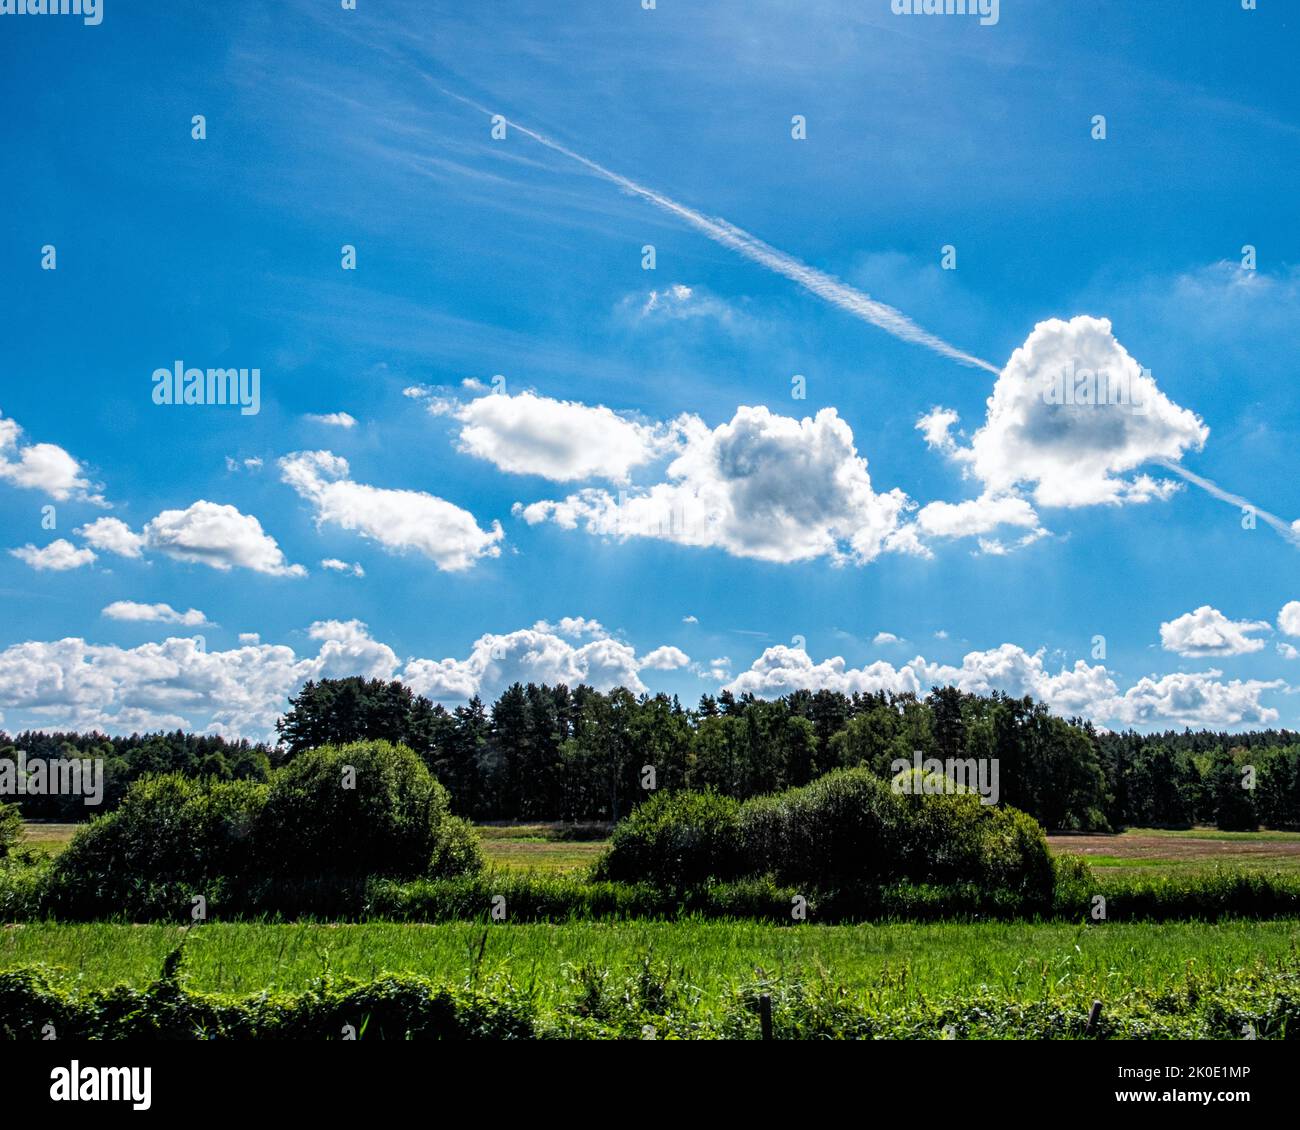 Blue sky with airplane condensation trail above fields in Quassow,Userin,Mecklenburg-Vorpommern, Germany. Stock Photo